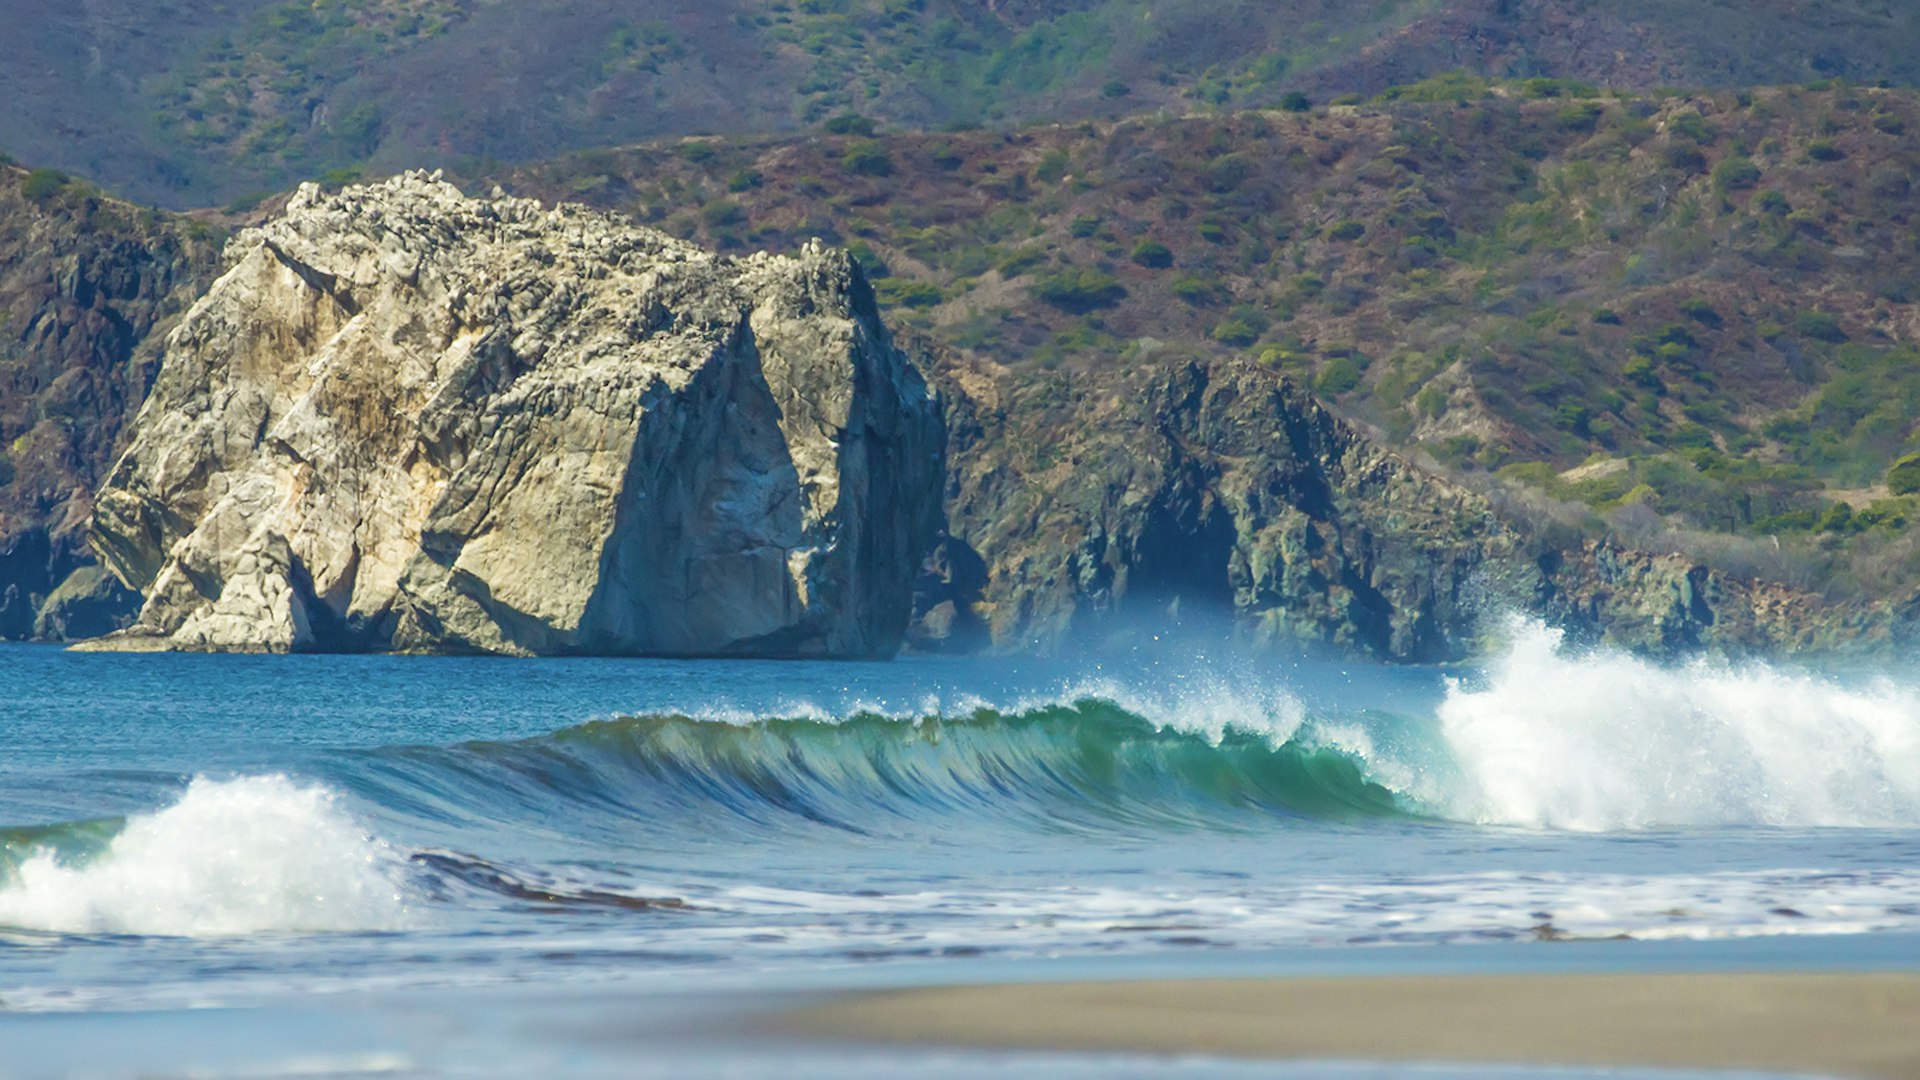 Features - The paradise surf beach of Playa Naranjo and Witch’s Rock in the Santa Rosa National Park in Guanacaste, Costa Rica